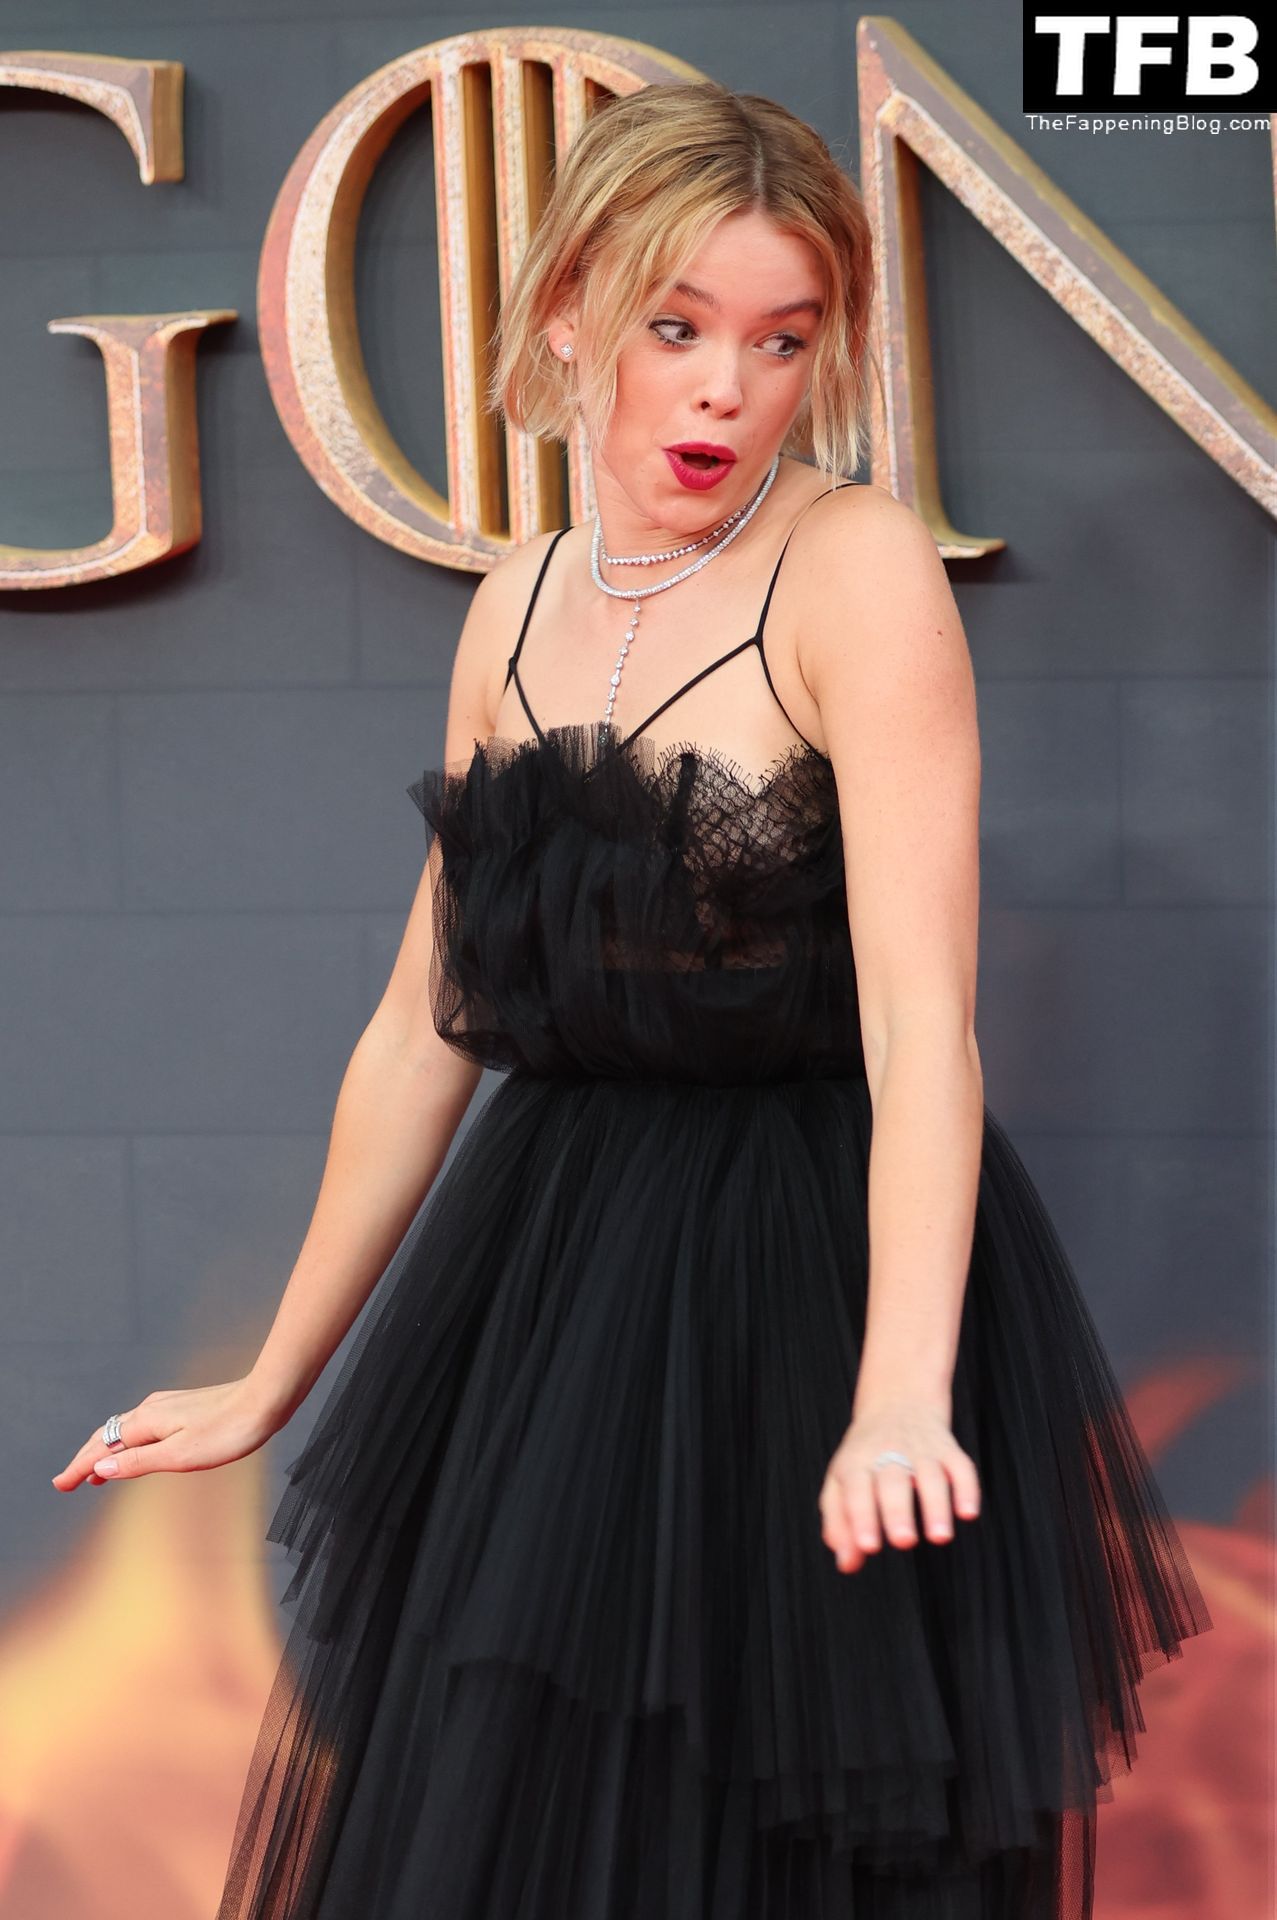 Milly Alcock Sexy The Fappening Blog 2 1 - Milly Alcock Poses in a Black Dress at the HBO’s “House of the Dragon” Premiere in London (23 Photos)